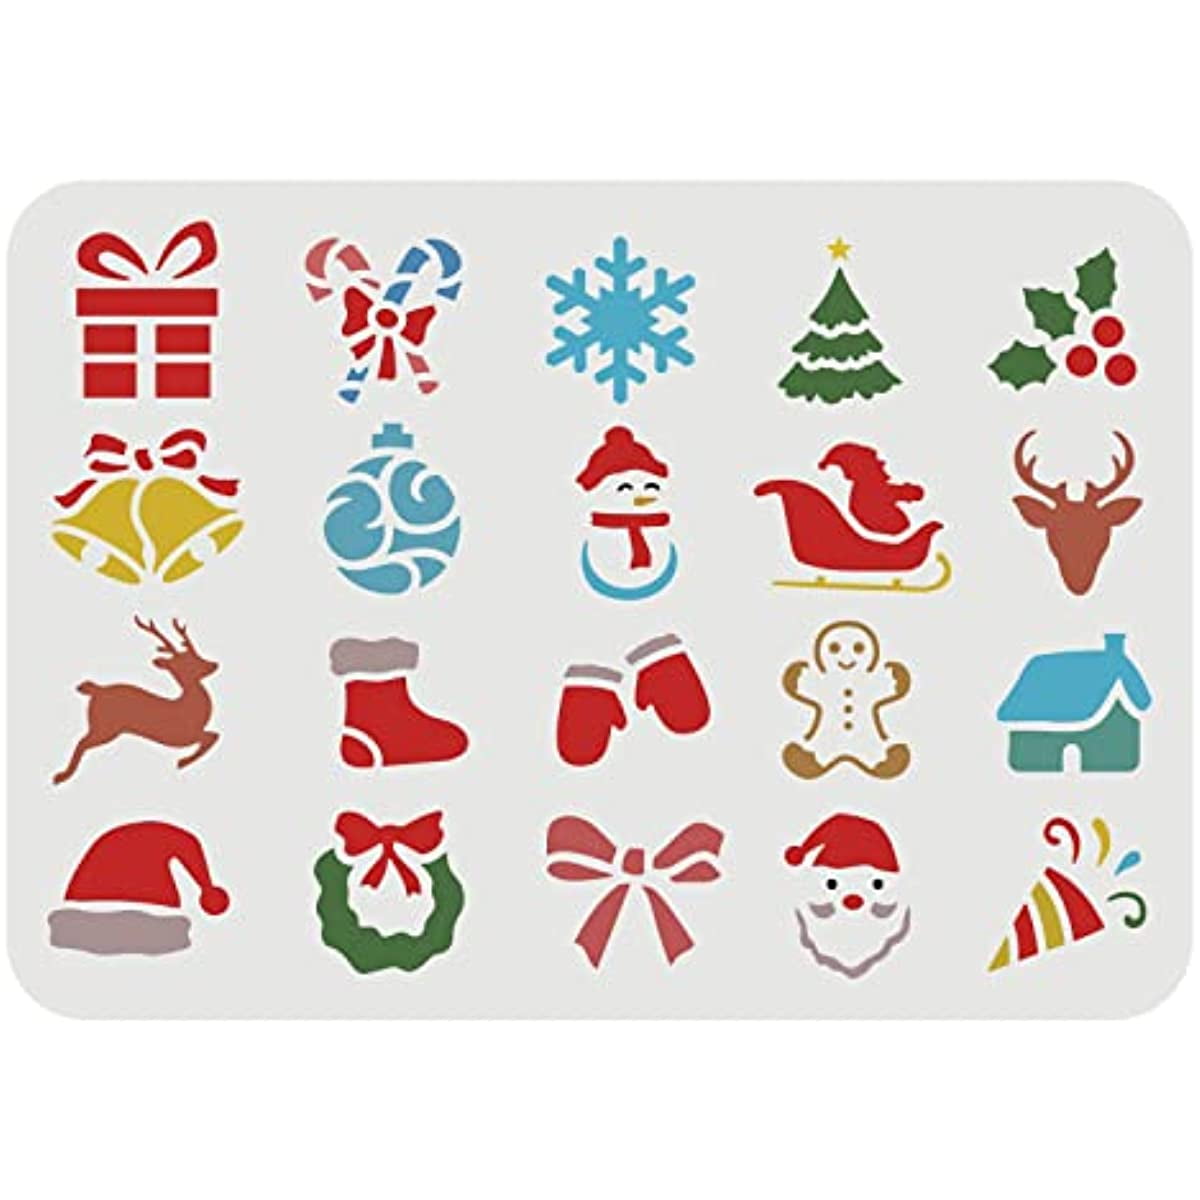 KIMOBER Christmas Stencils for Painting on Wood,10PCS Large Reusable Merry  Christmas Templates with Snowflakes Elk Santa Claus for Wood Signs,DIY